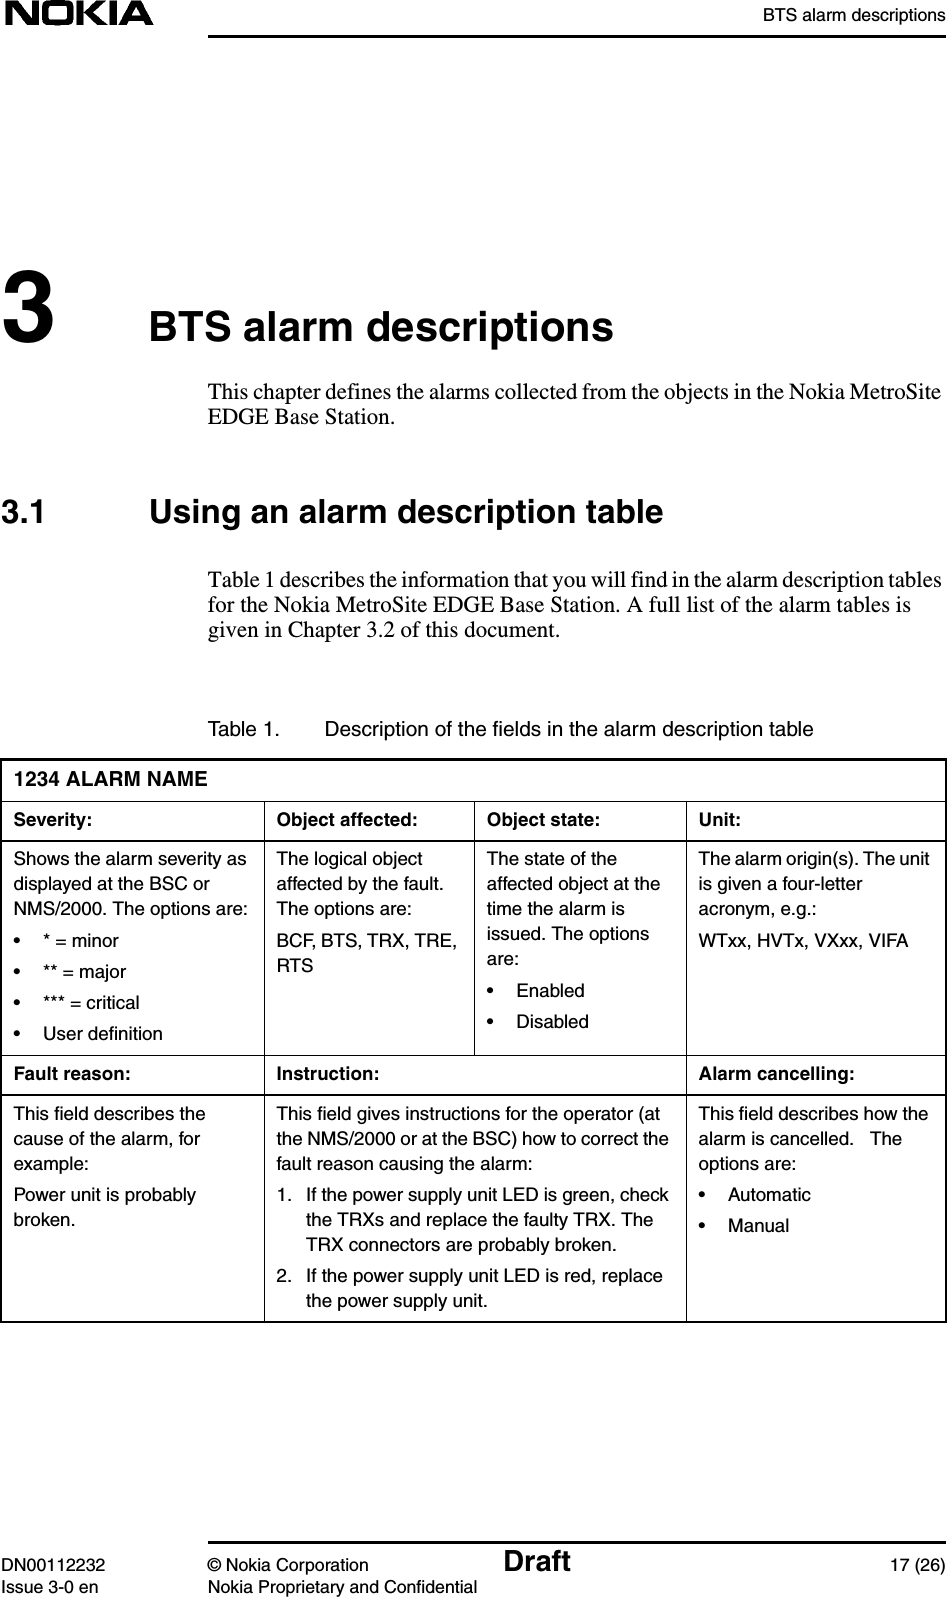 BTS alarm descriptionsDN00112232 © Nokia Corporation Draft 17 (26)Issue 3-0 en Nokia Proprietary and Confidential3BTS alarm descriptionsThis chapter defines the alarms collected from the objects in the Nokia MetroSiteEDGE Base Station.3.1 Using an alarm description tableTable 1 describes the information that you will find in the alarm description tablesfor the Nokia MetroSite EDGE Base Station. A full list of the alarm tables isgiven in Chapter 3.2 of this document.Table 1. Description of the ﬁelds in the alarm description table1234 ALARM NAMESeverity: Object affected: Object state: Unit:Shows the alarm severity asdisplayed at the BSC orNMS/2000. The options are:• * = minor• ** = major• *** = critical• User deﬁnitionThe logical objectaffected by the fault.The options are:BCF, BTS, TRX, TRE,RTSThe state of theaffected object at thetime the alarm isissued. The optionsare:• Enabled• DisabledThe alarm origin(s). The unitis given a four-letteracronym, e.g.:WTxx, HVTx, VXxx, VIFAFault reason: Instruction: Alarm cancelling:This ﬁeld describes thecause of the alarm, forexample:Power unit is probablybroken.This ﬁeld gives instructions for the operator (atthe NMS/2000 or at the BSC) how to correct thefault reason causing the alarm:1. If the power supply unit LED is green, checkthe TRXs and replace the faulty TRX. TheTRX connectors are probably broken.2. If the power supply unit LED is red, replacethe power supply unit.This ﬁeld describes how thealarm is cancelled.   Theoptions are:• Automatic• Manual